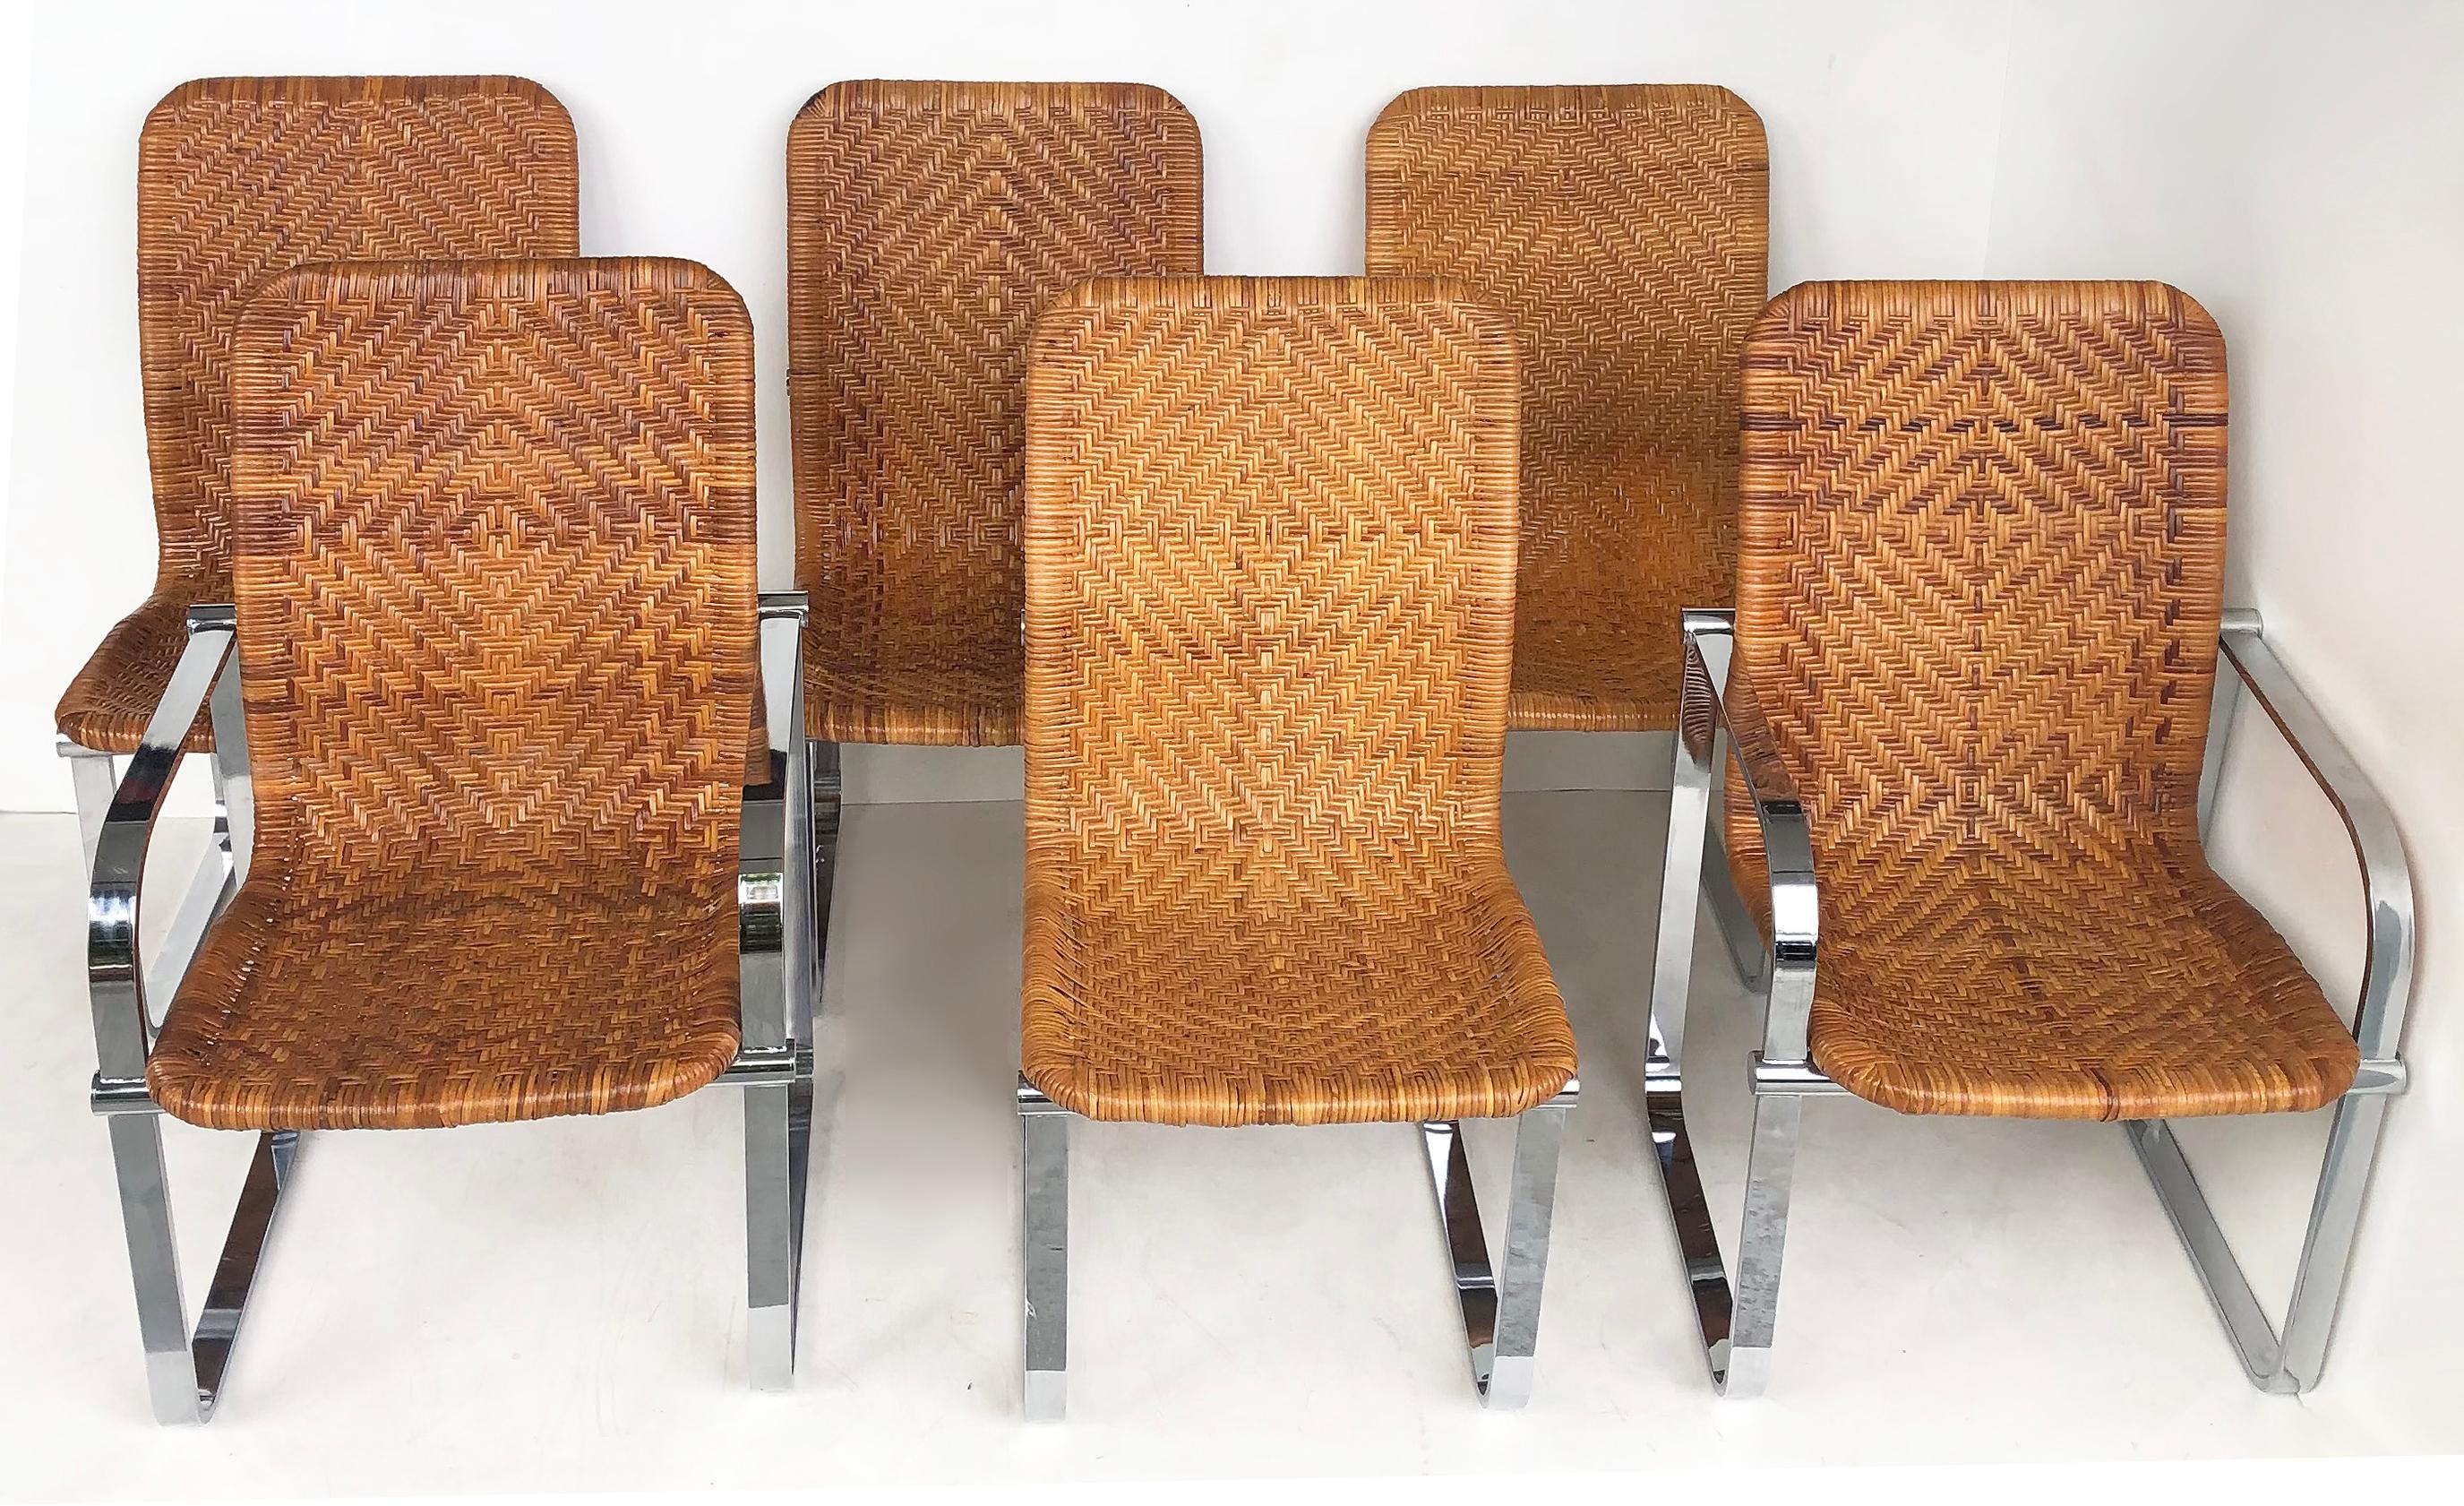 Stendig stainless steel & rattan dining chairs, Set of 6, 1970s

Offered for sale is a set of six mid-century modern stainless steel and woven rattan dining chairs including two armchairs and four side chairs. This elegant set of chairs was